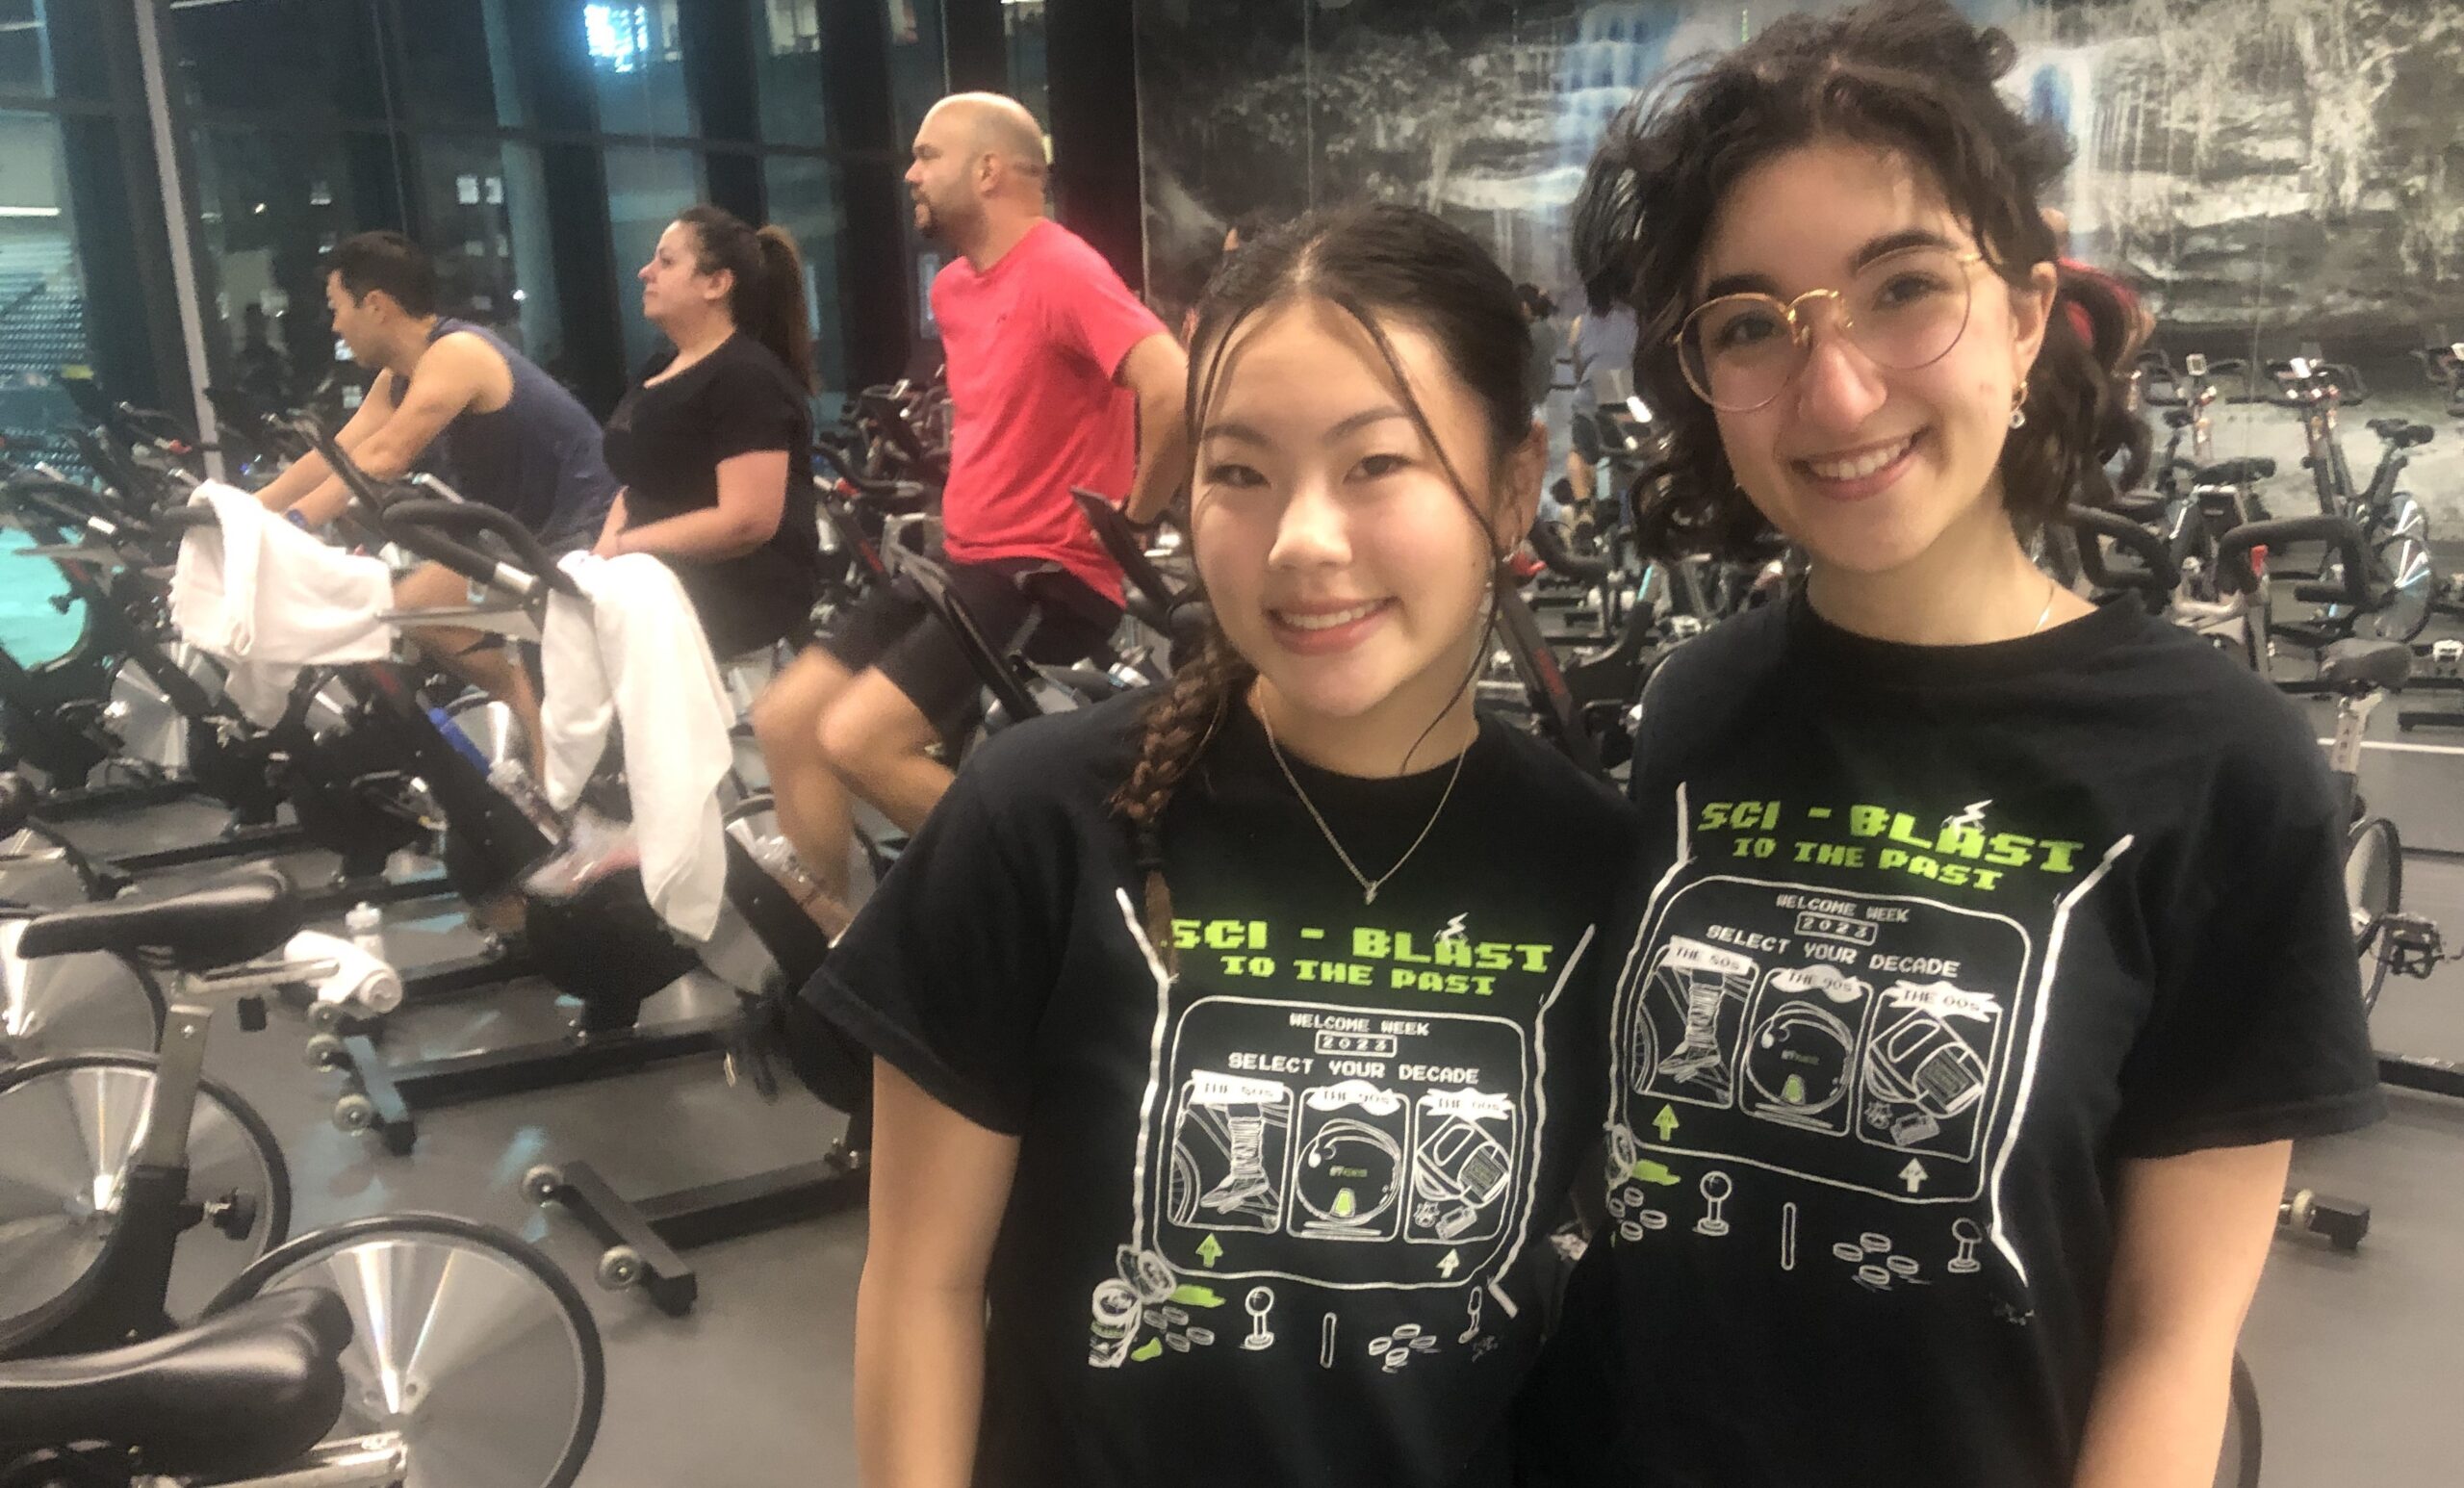 Friends Leena Han and Lily Eshraghi organized an exclusive spin class for first-year students taught by Dean Maureen MacDonald